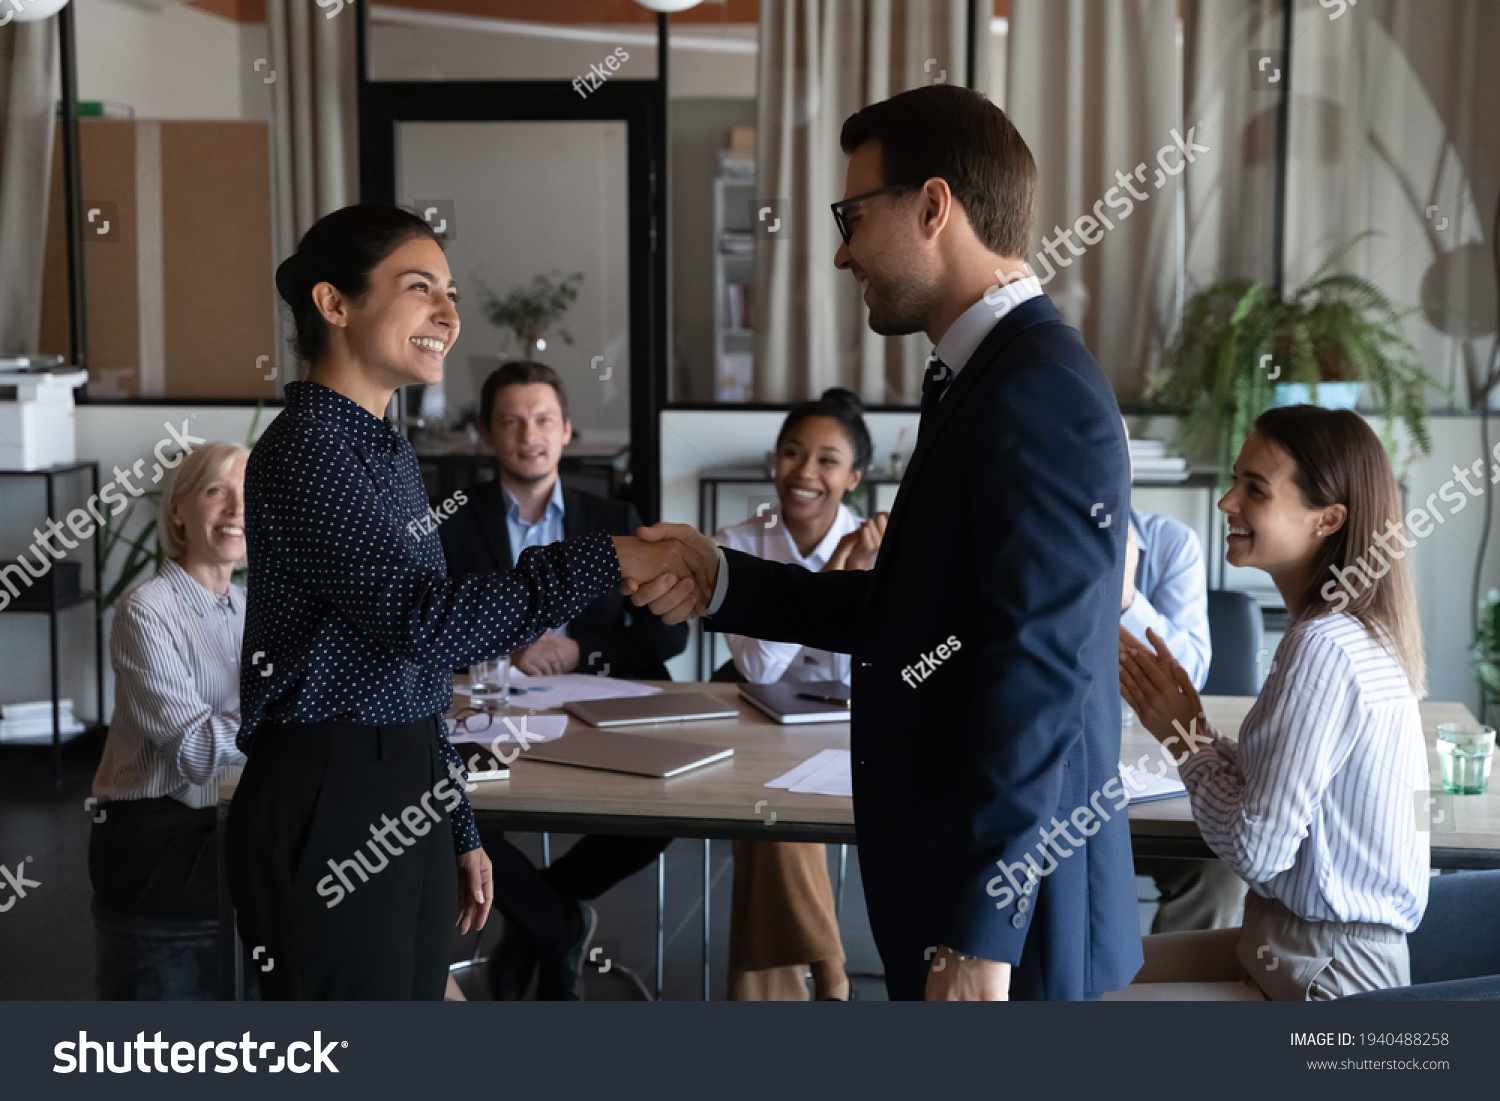 Smiling diverse multiracial employees handshake close deal agreement at meeting. Happy multiethnic businesspeople shake hand get acquainted greet at briefing, congratulate colleague with promotion. #1940488258